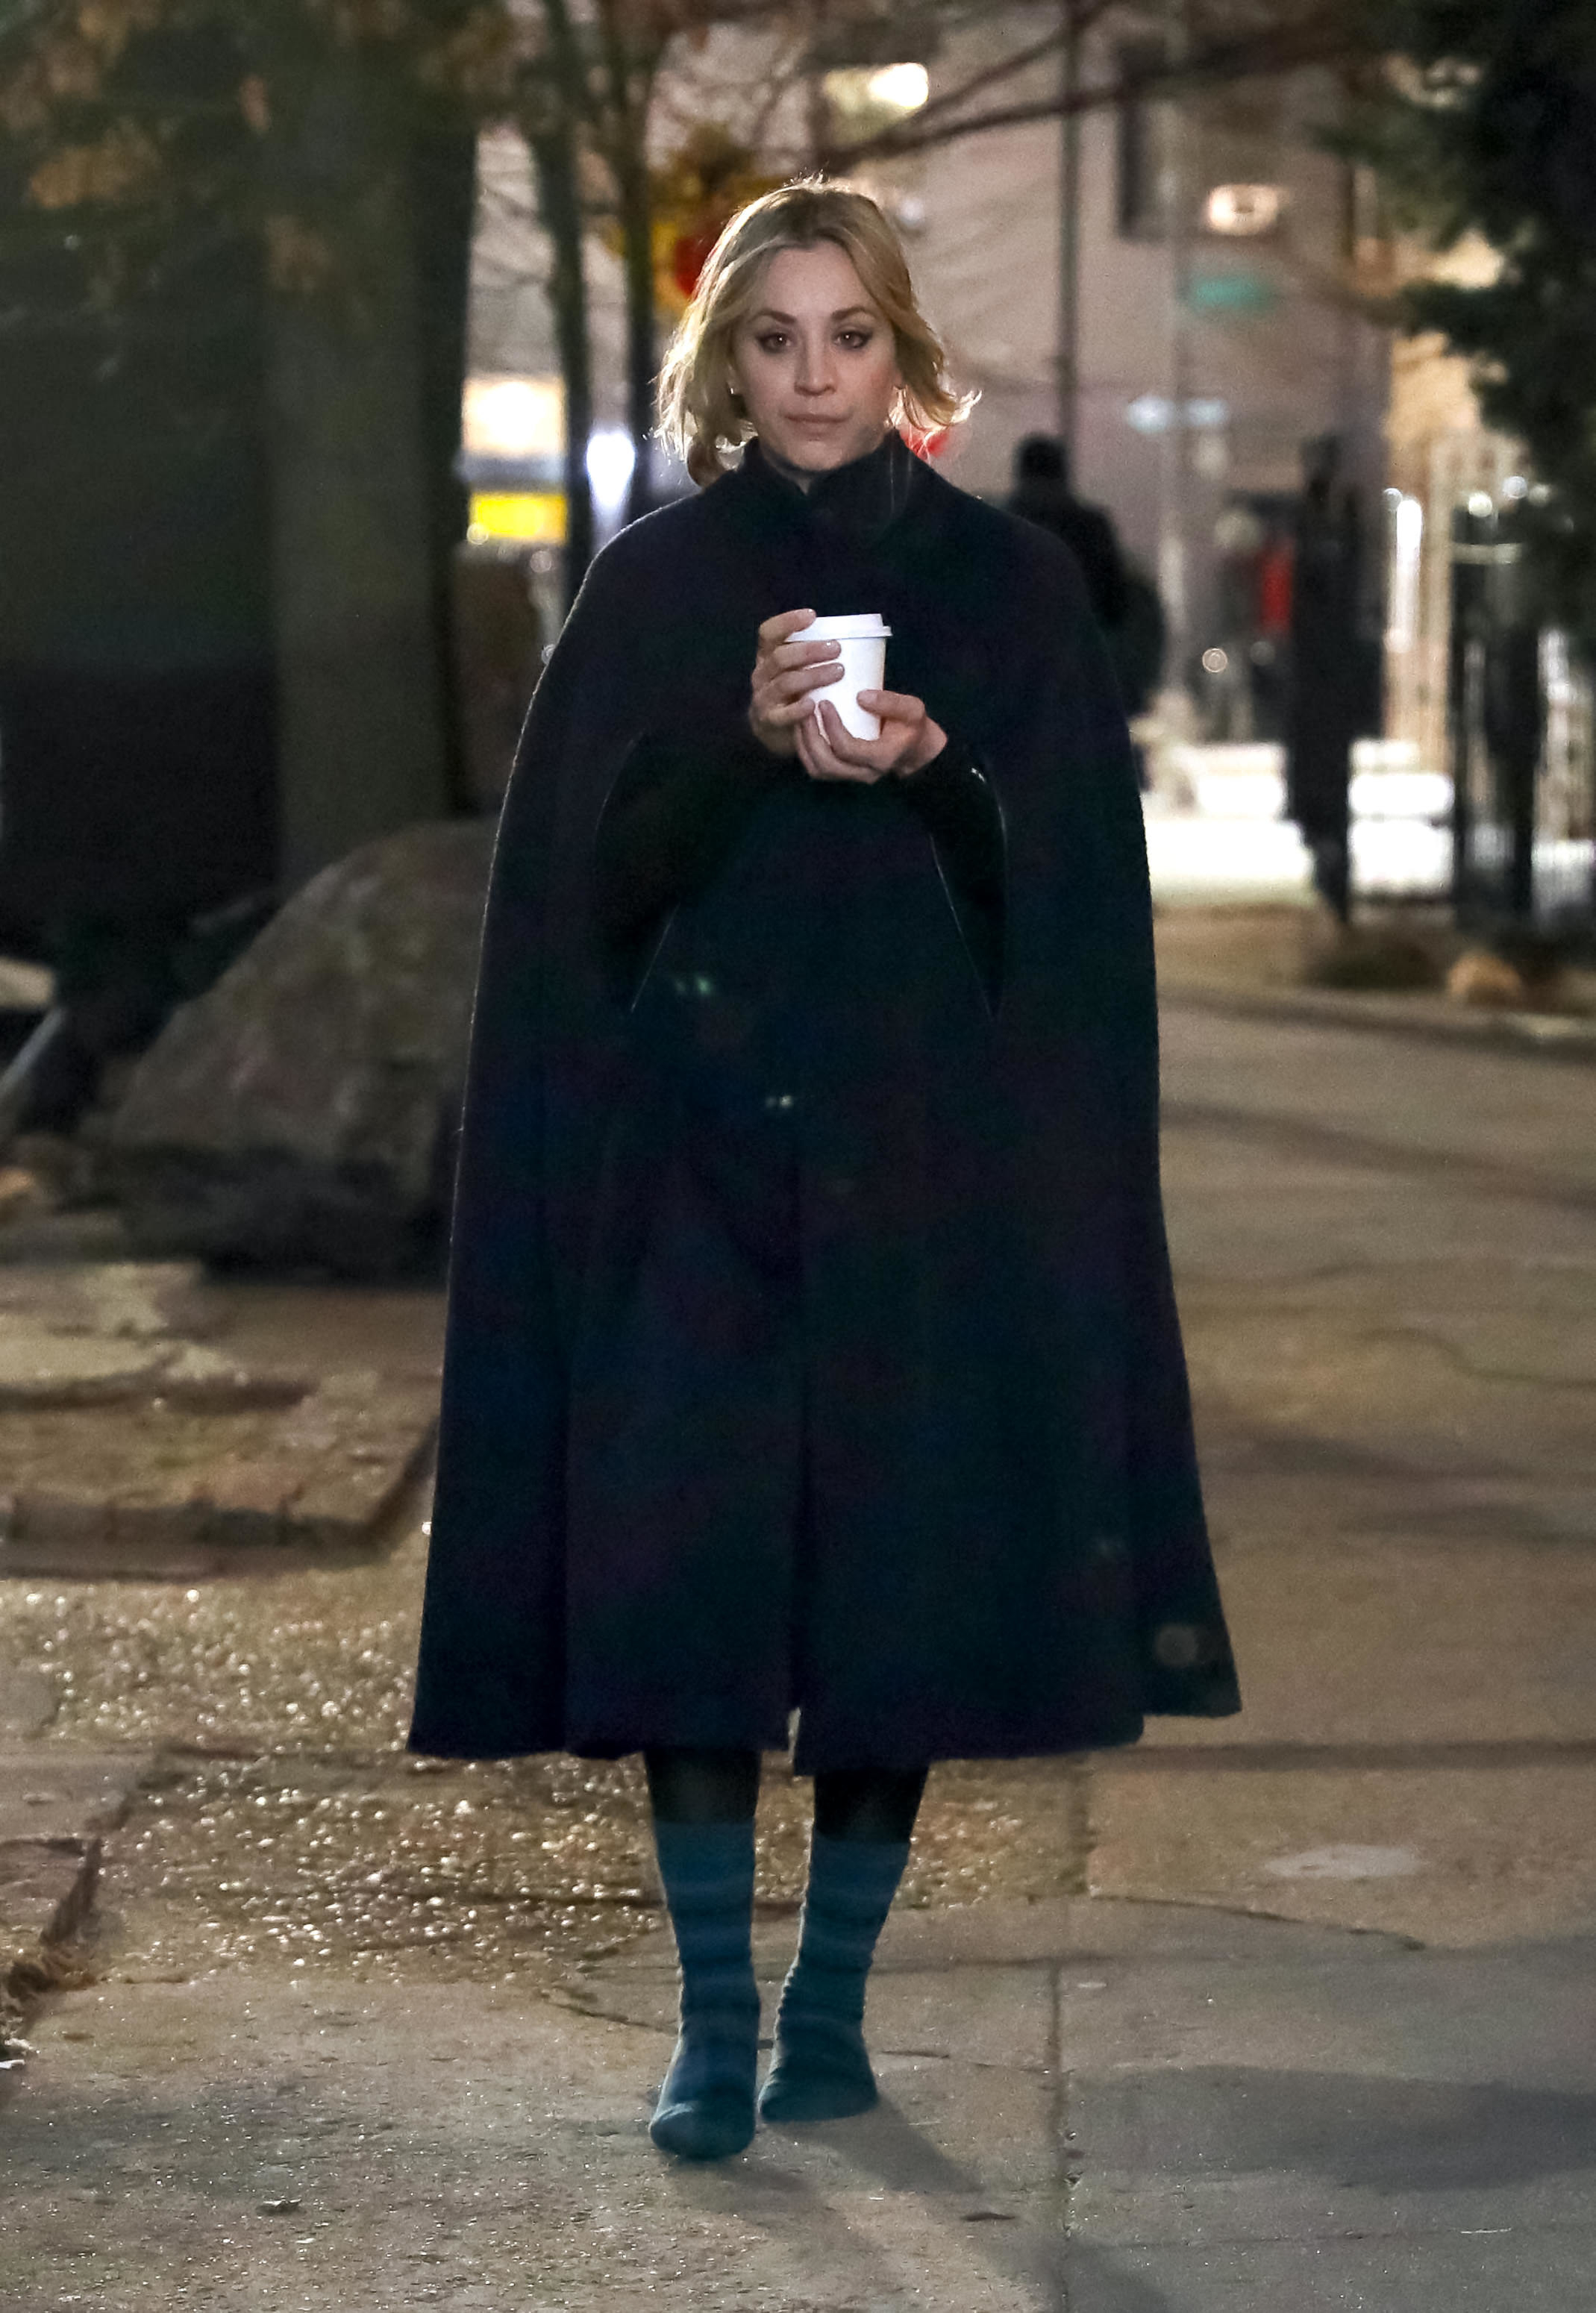 Kaley walks down the street with a hot beverage